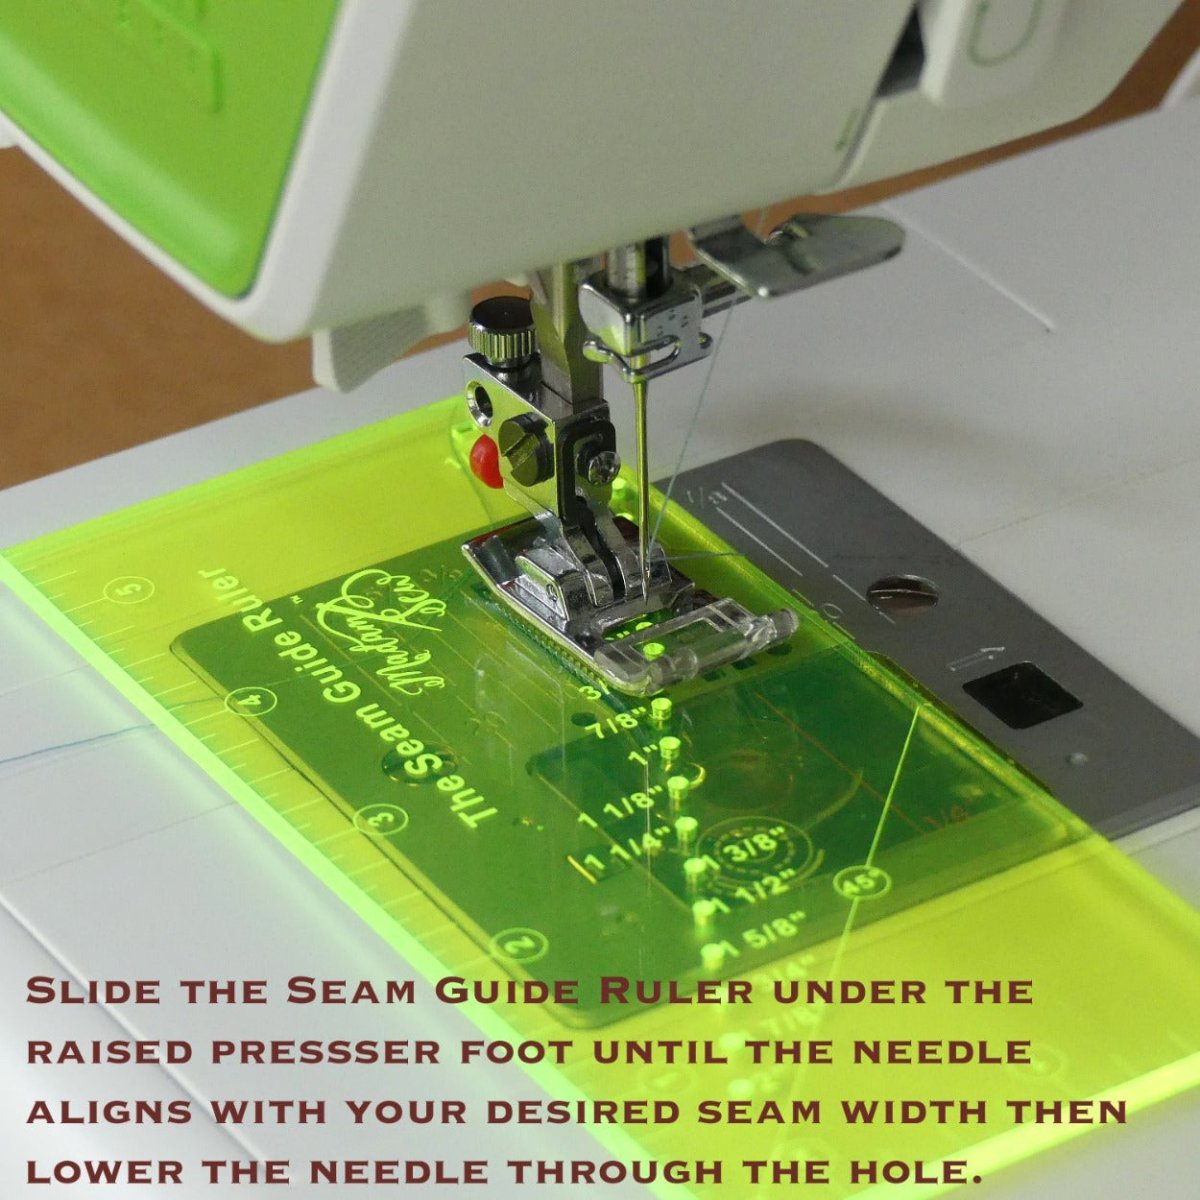 how to use the seam guide ruler